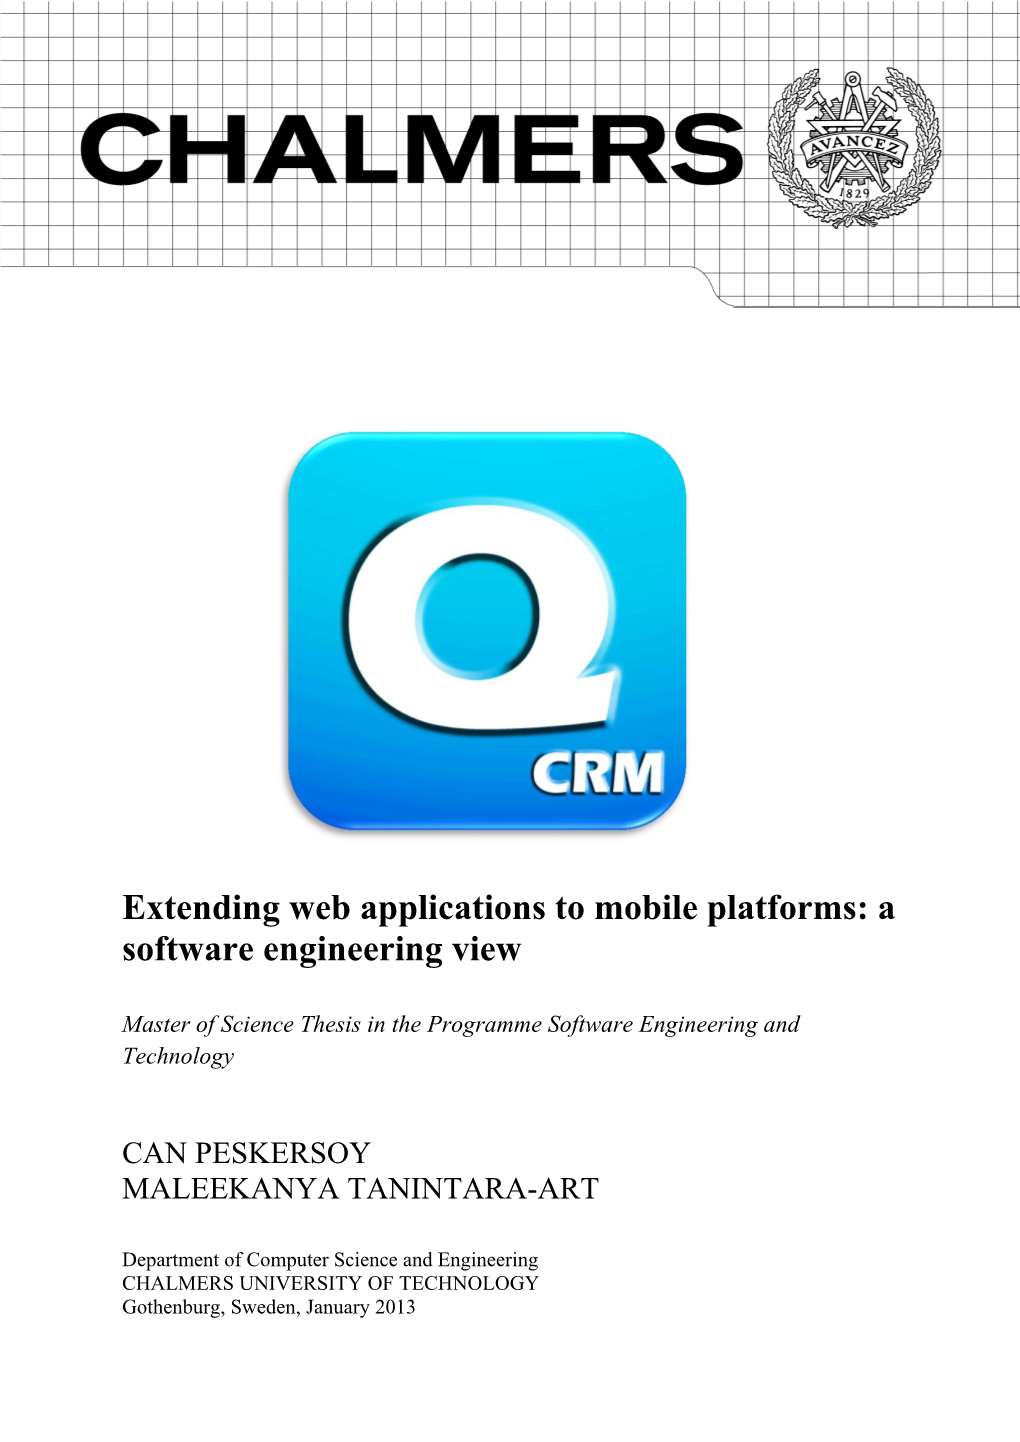 Extending Web Applications to Mobile Platforms: a Software Engineering View